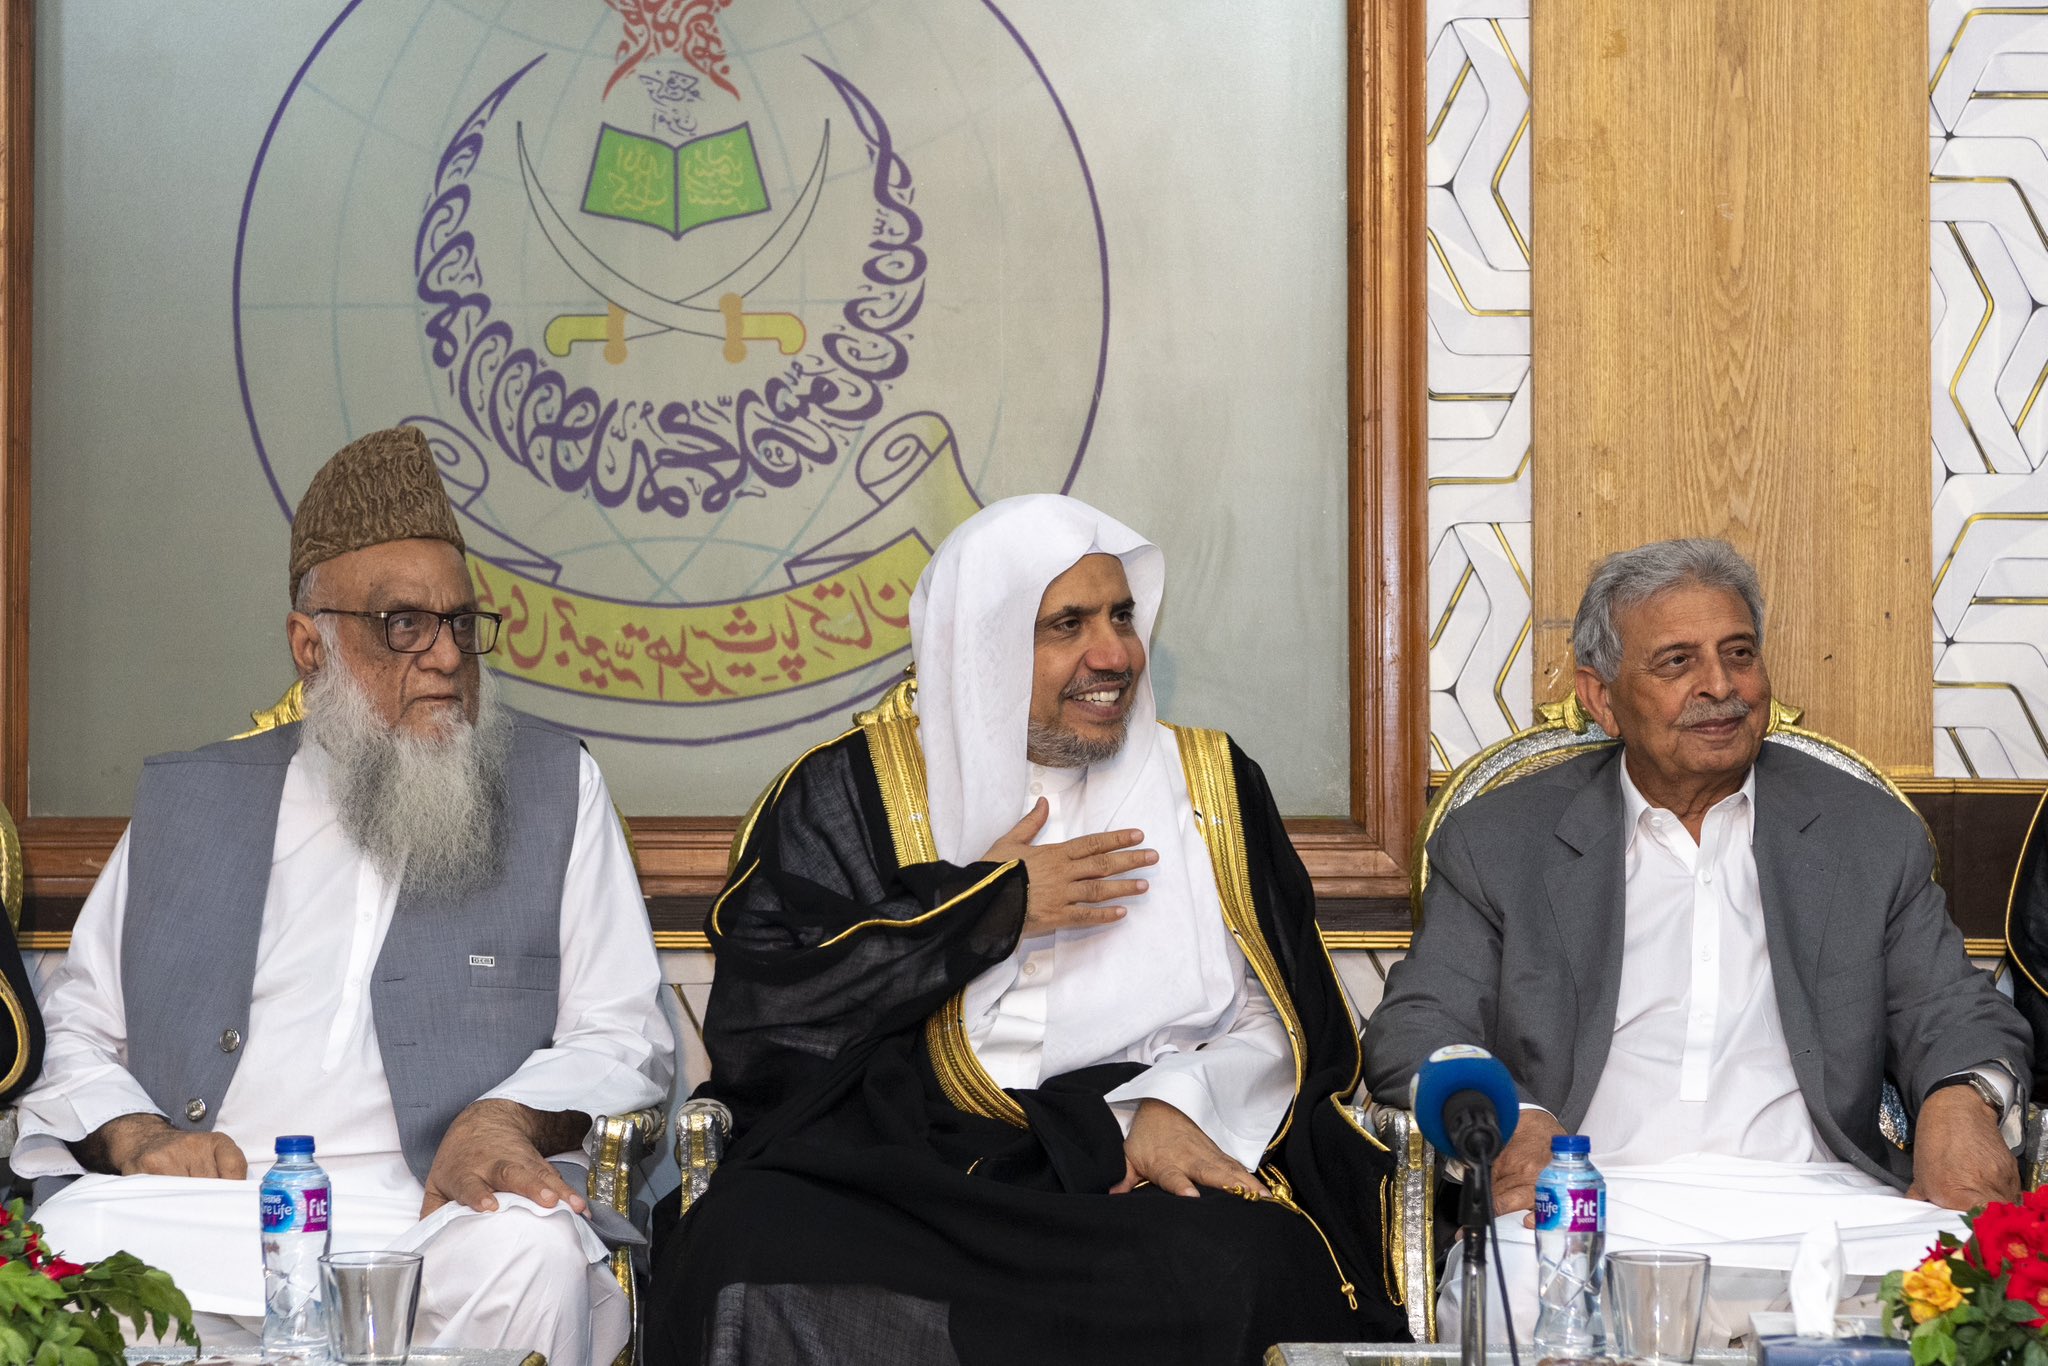 Muslim World League On Twitter He Sheikh Drmhmdalissa Arrived At Jamiat Ahle Hadith